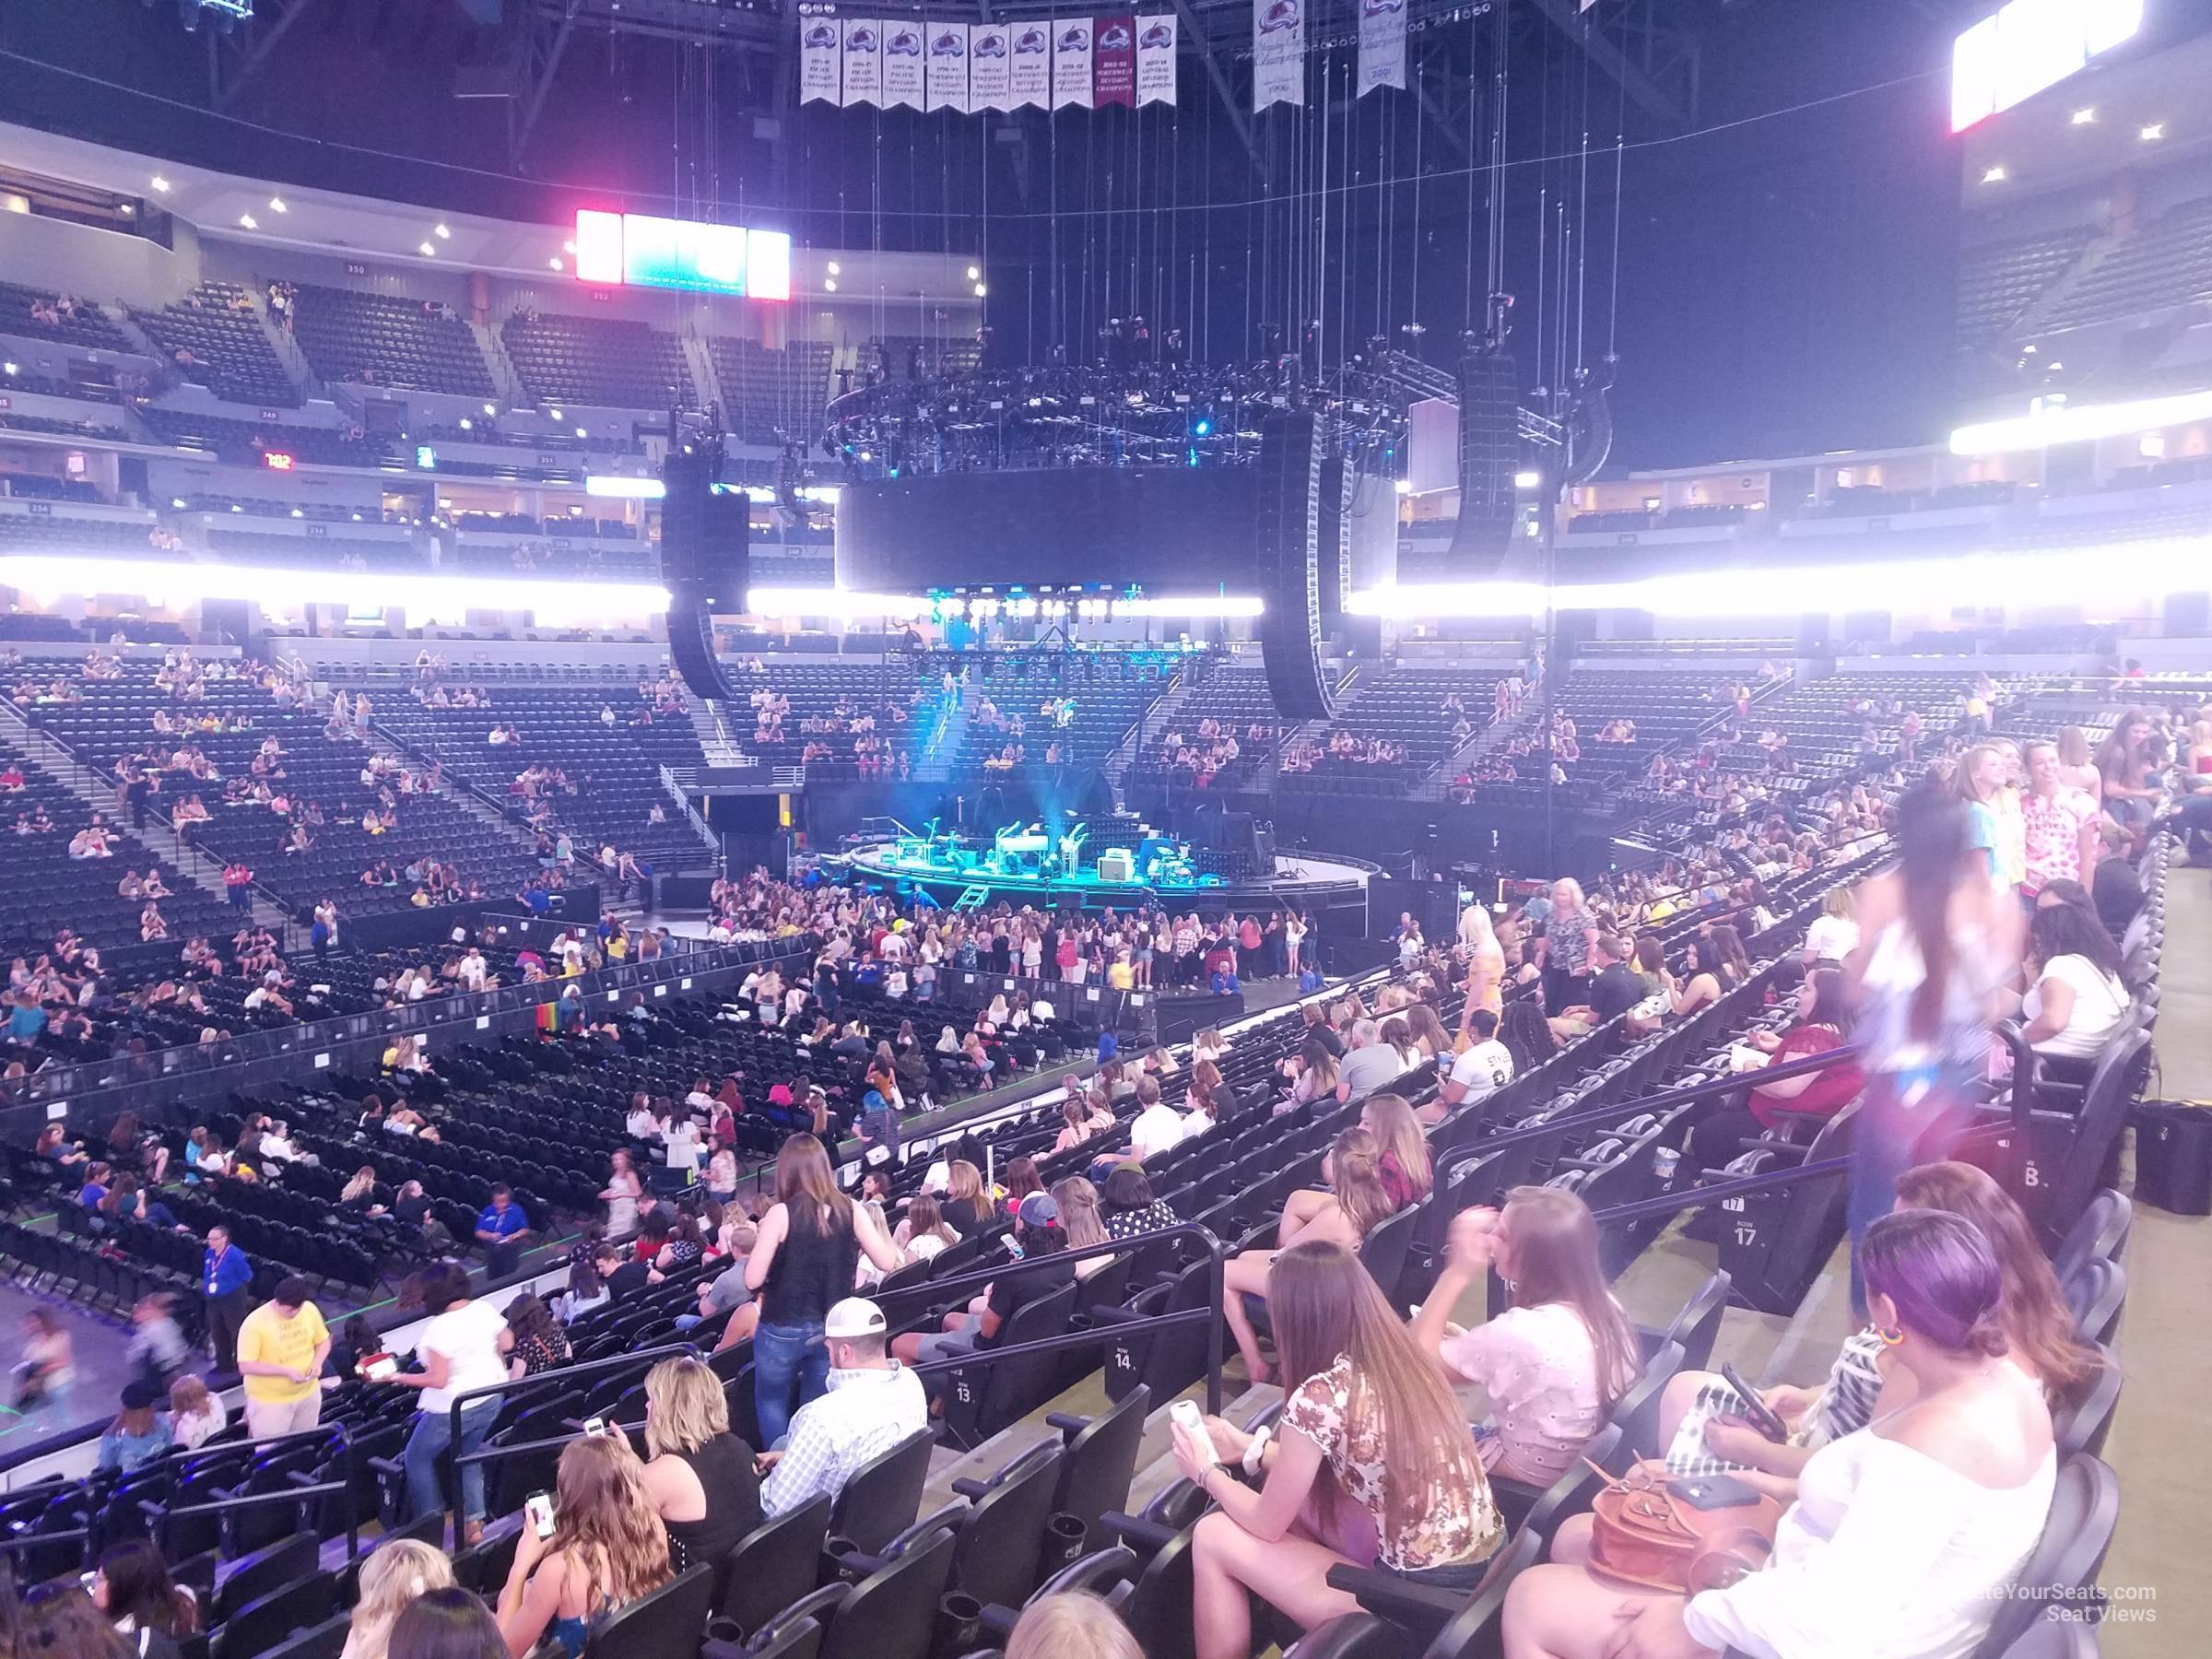 section 104, row 19 seat view  for concert - ball arena